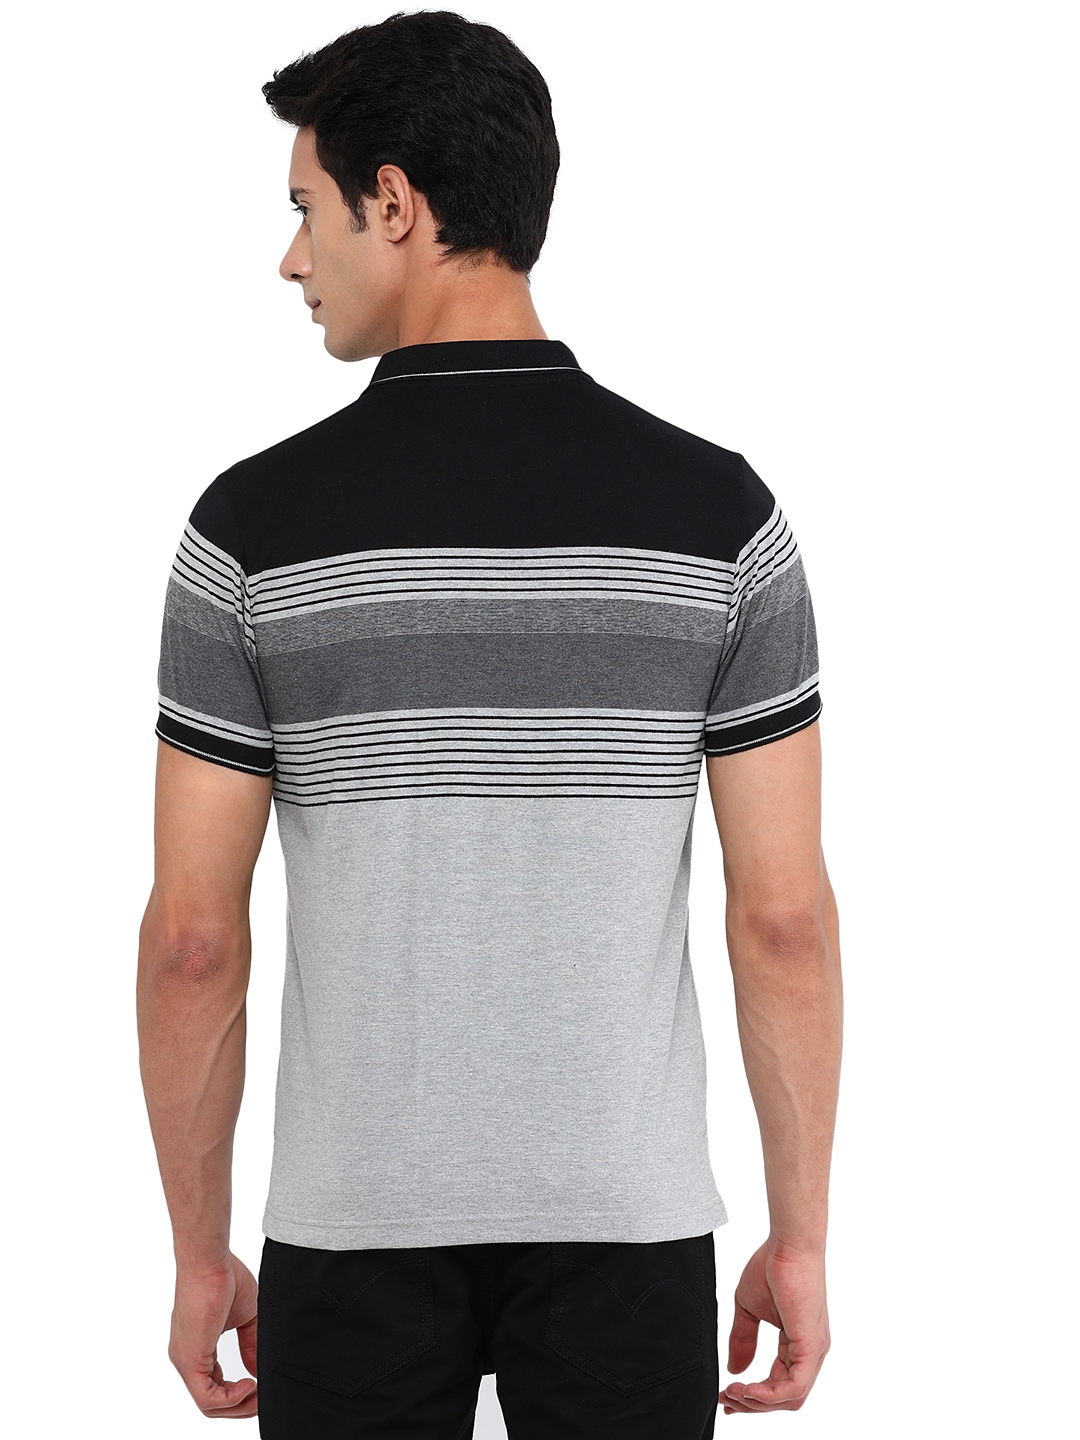 Greenfibre | Caster Grey Striped Slim Fit Polo T-Shirt | Greenfibre 2